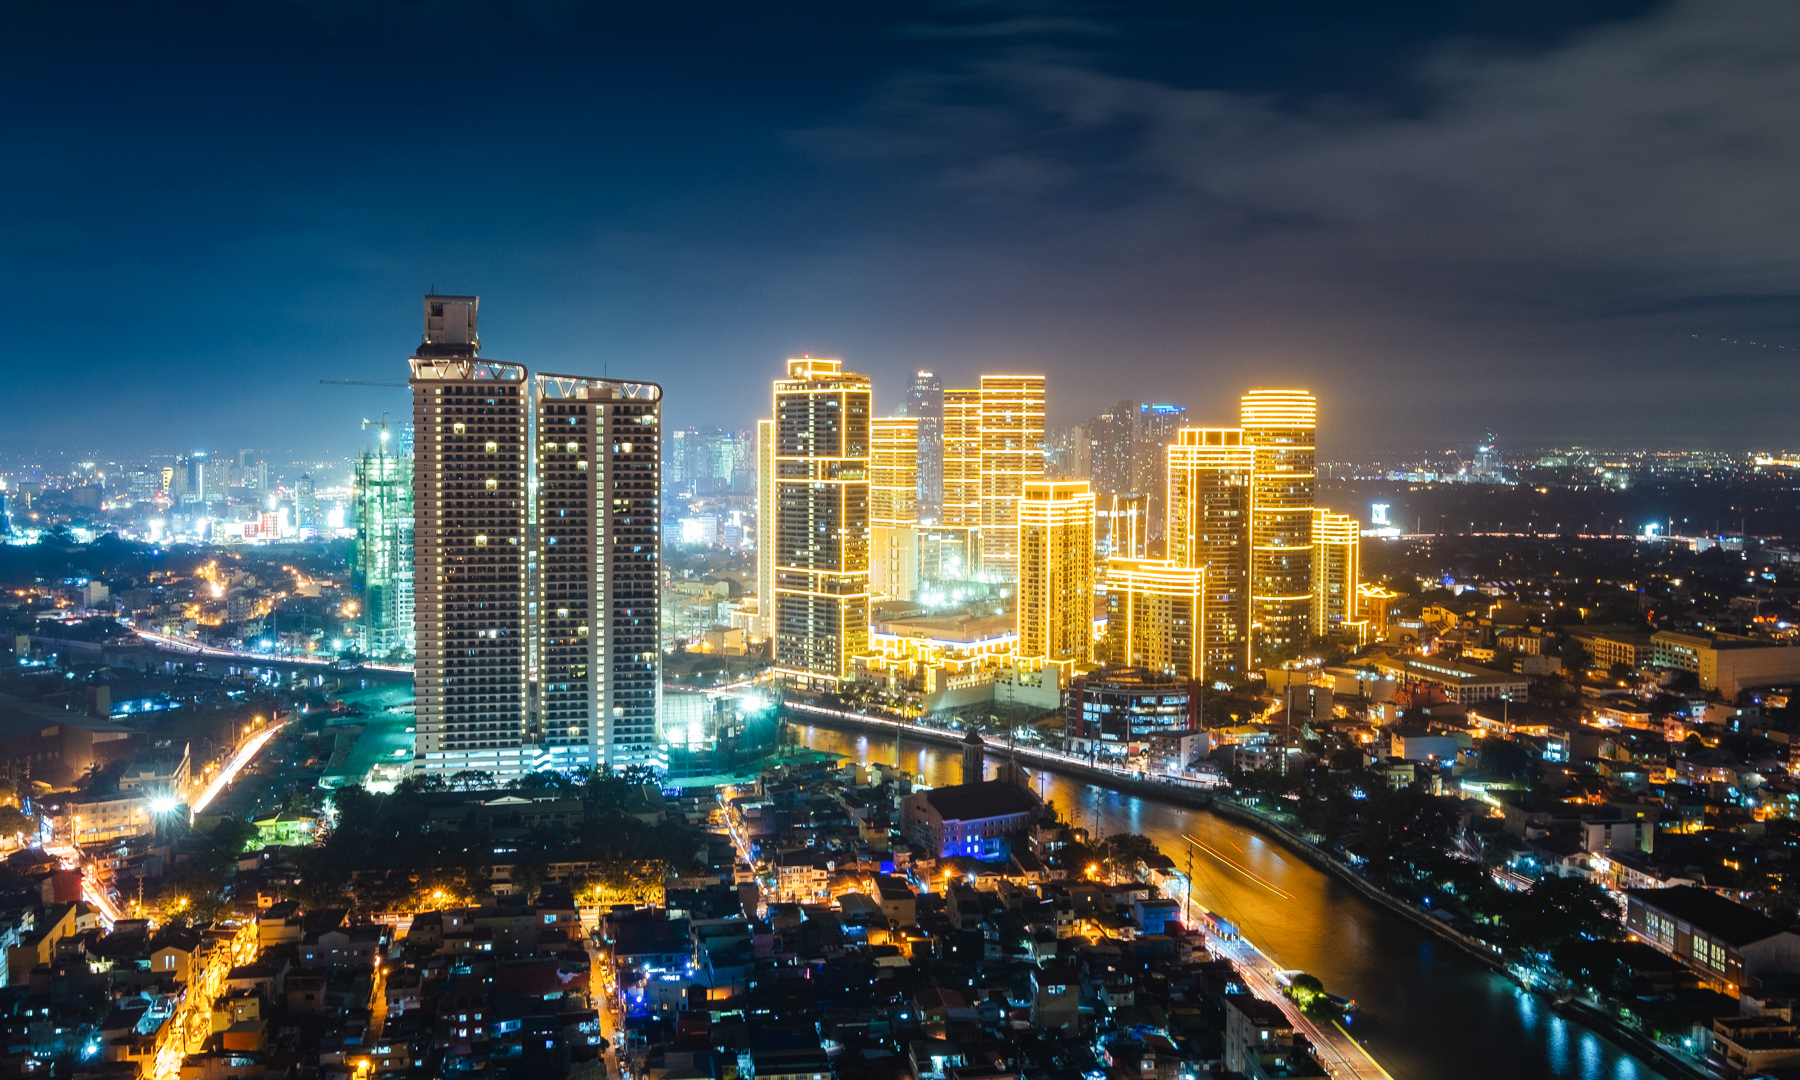 Travel Tips for Visiting Manila Safely and Smoothly